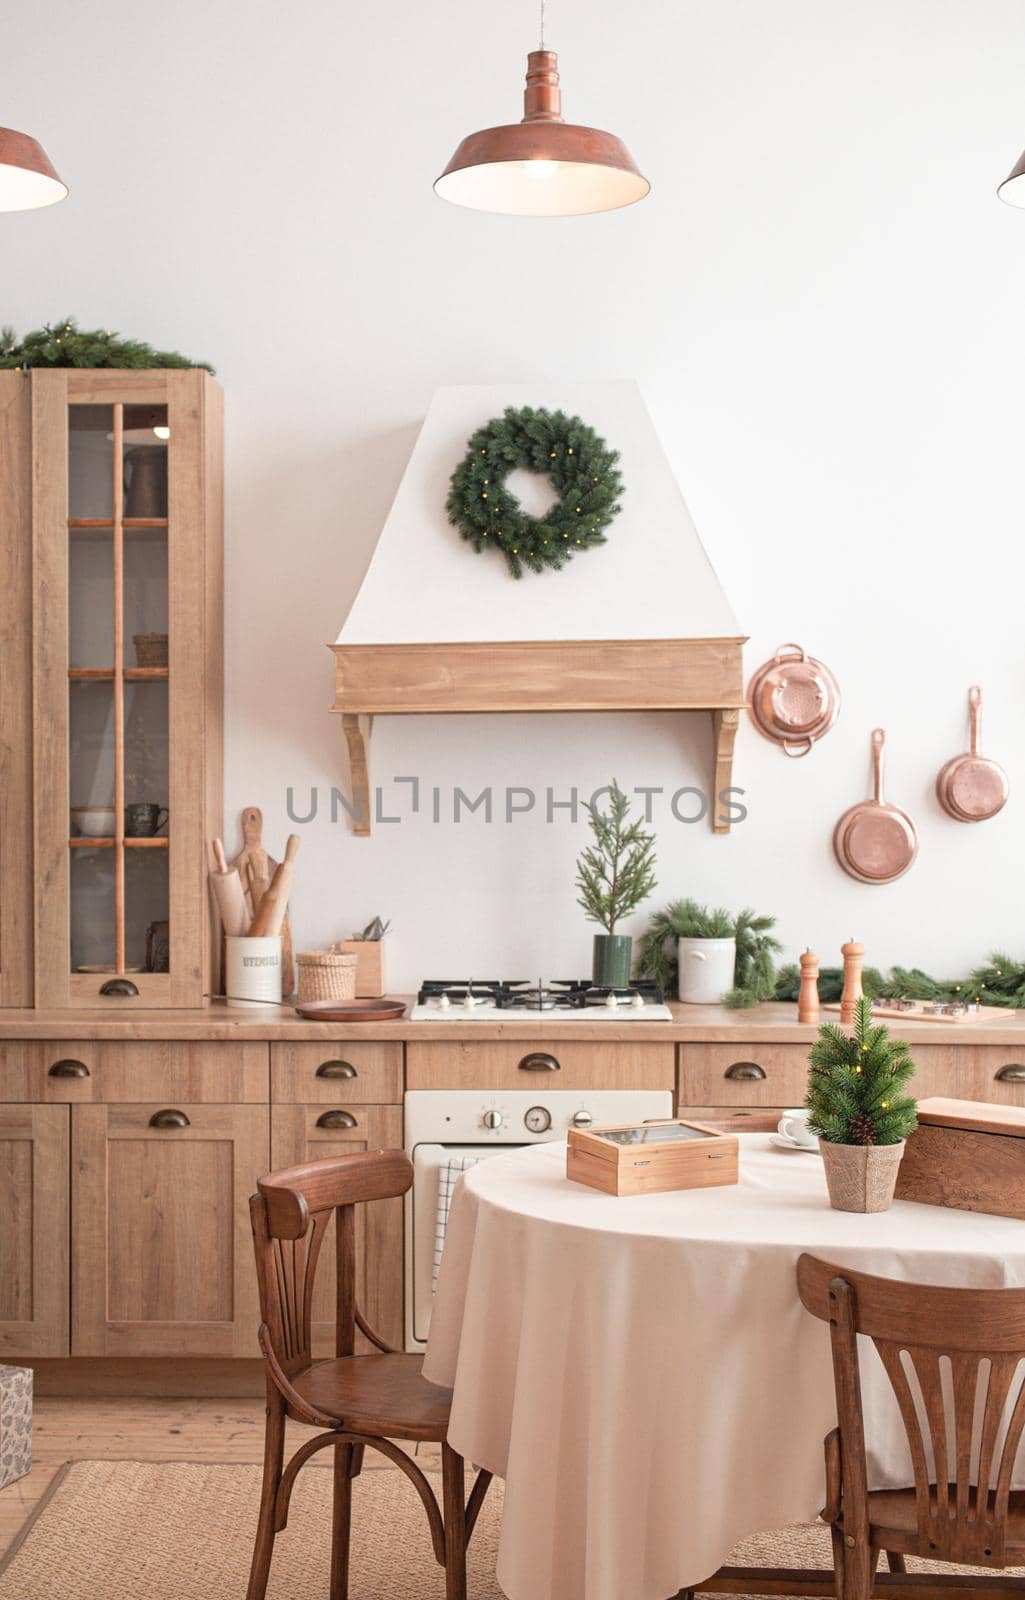 Modern, light, festive, cozy kitchen interior with Christmas and New Year decorations, kitchen table, utensils, copper pans on wall and big Christmas tree with presents, winter holidays concept